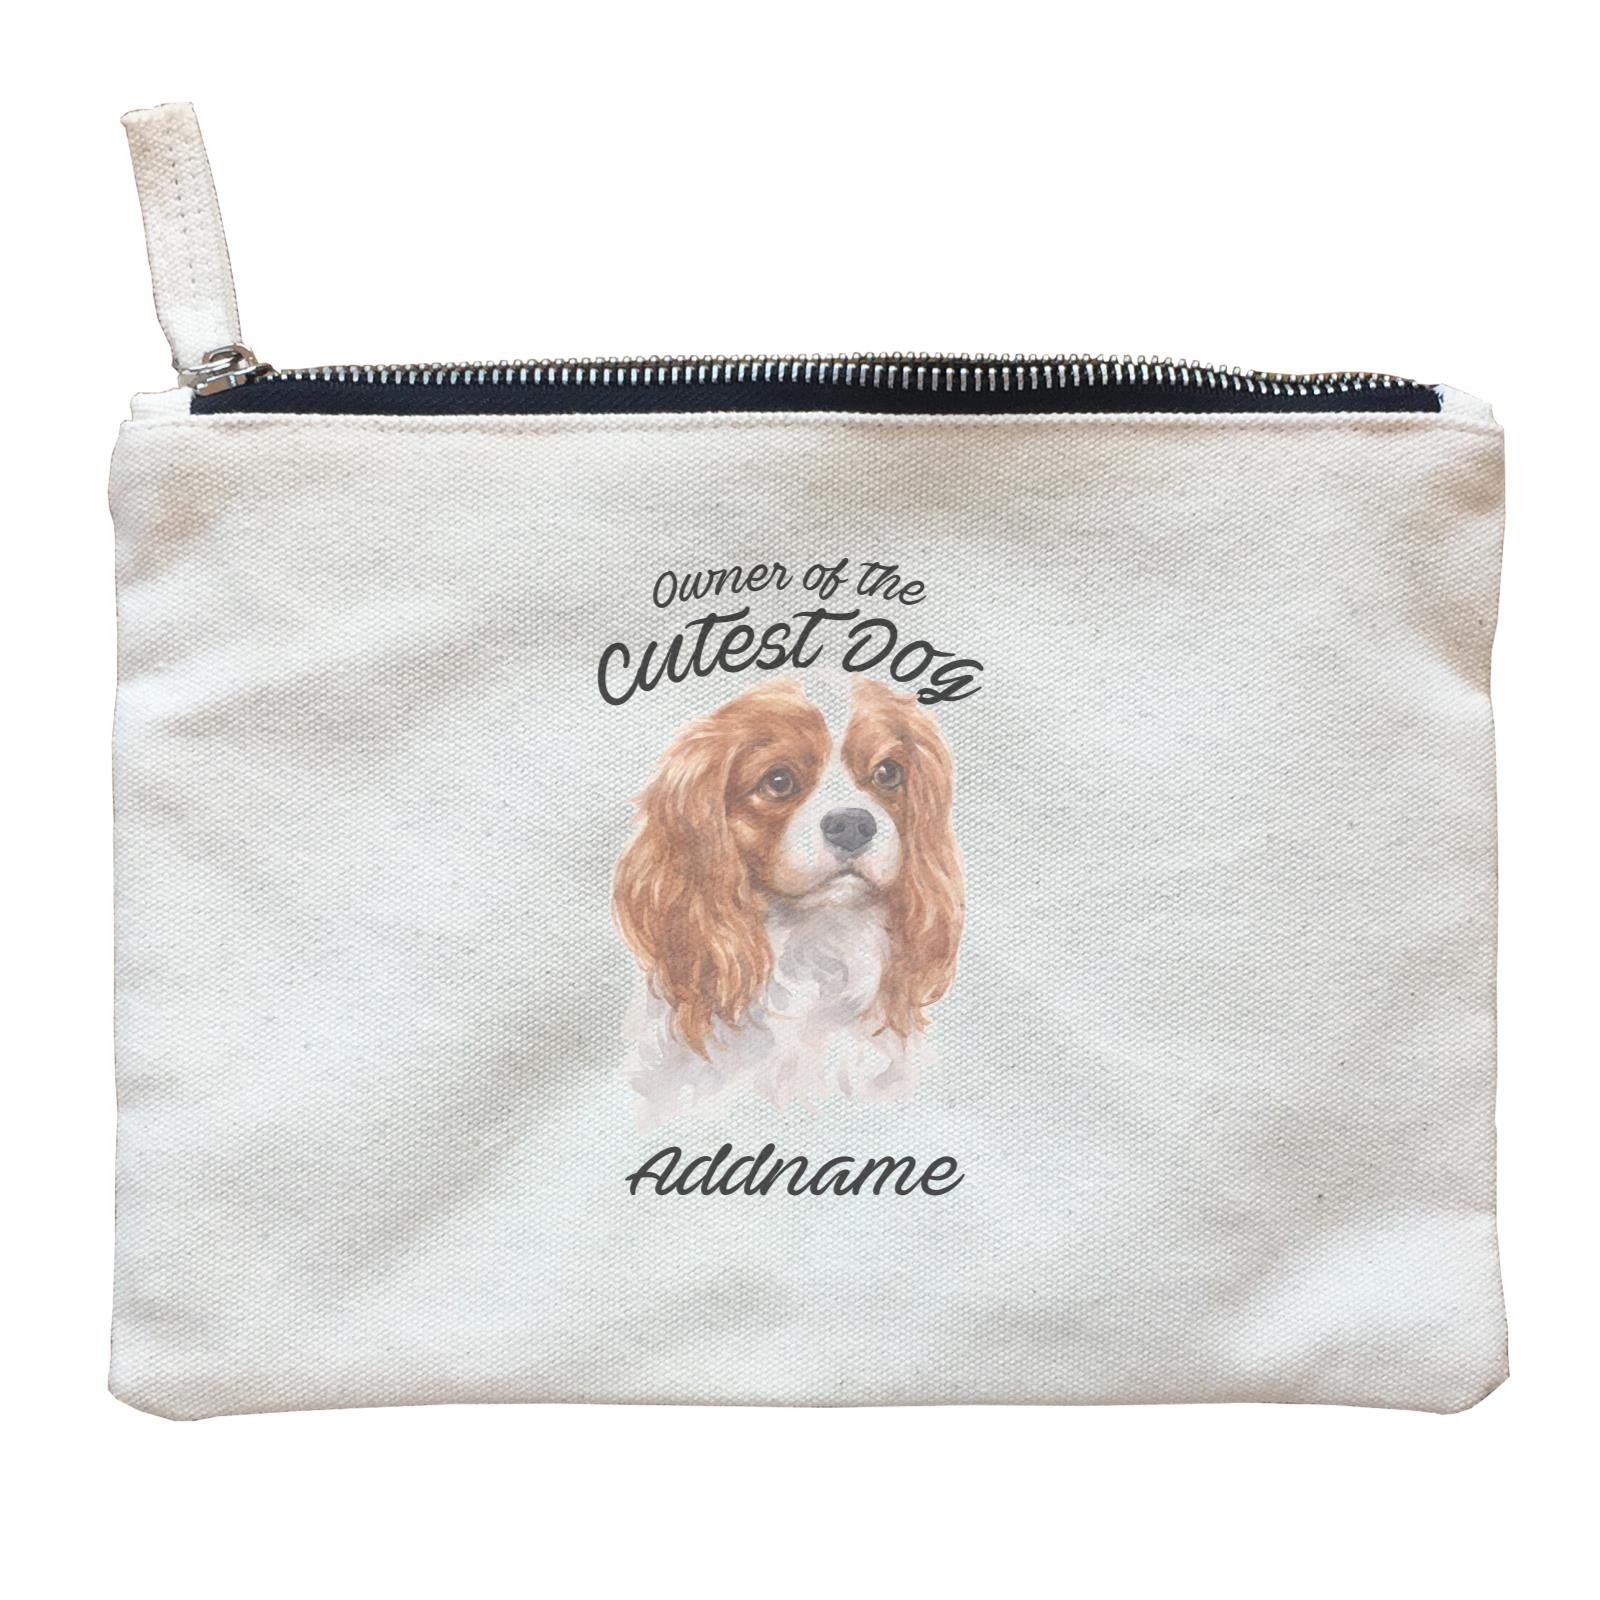 Watercolor Dog Owner Of The Cutest Dog King Charles Spaniel Addname Zipper Pouch